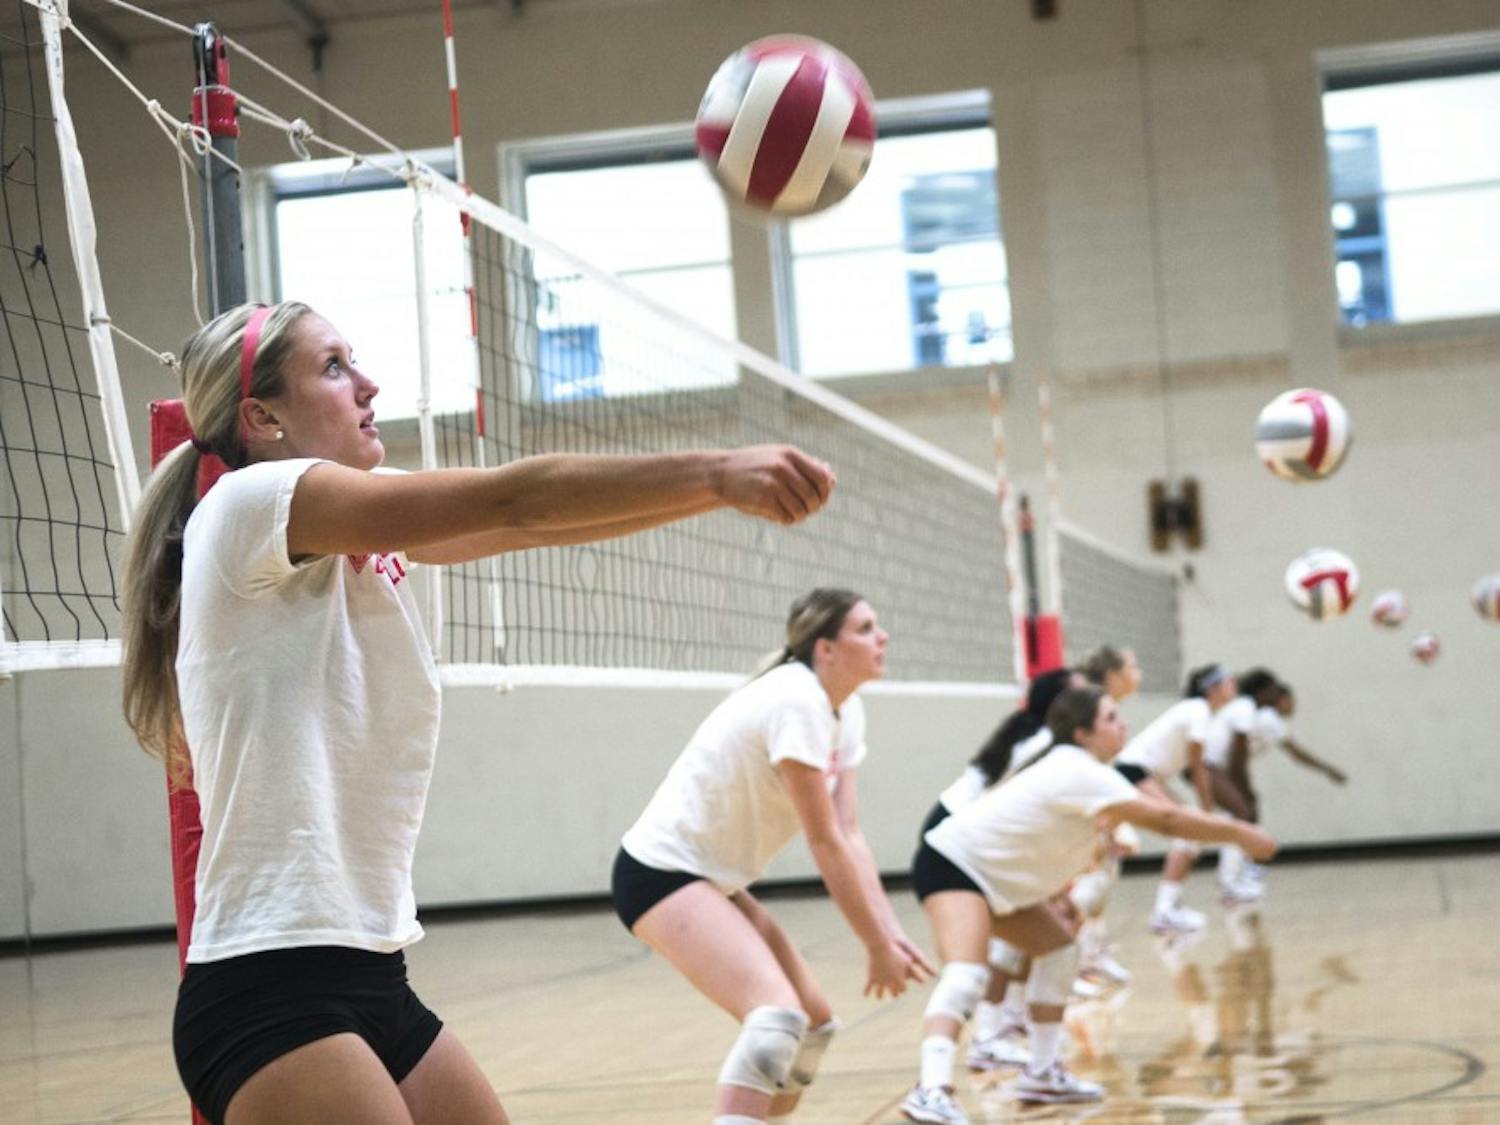 	New Mexico volleyball setter Hannah Johnson runs drills with her teammates at Johnson Gym on Aug. 11. The volleyball team was recently recognized in the American Volleyball Coaches Association Division I Preseason Poll with nine points placing them among the Top 40 teams.